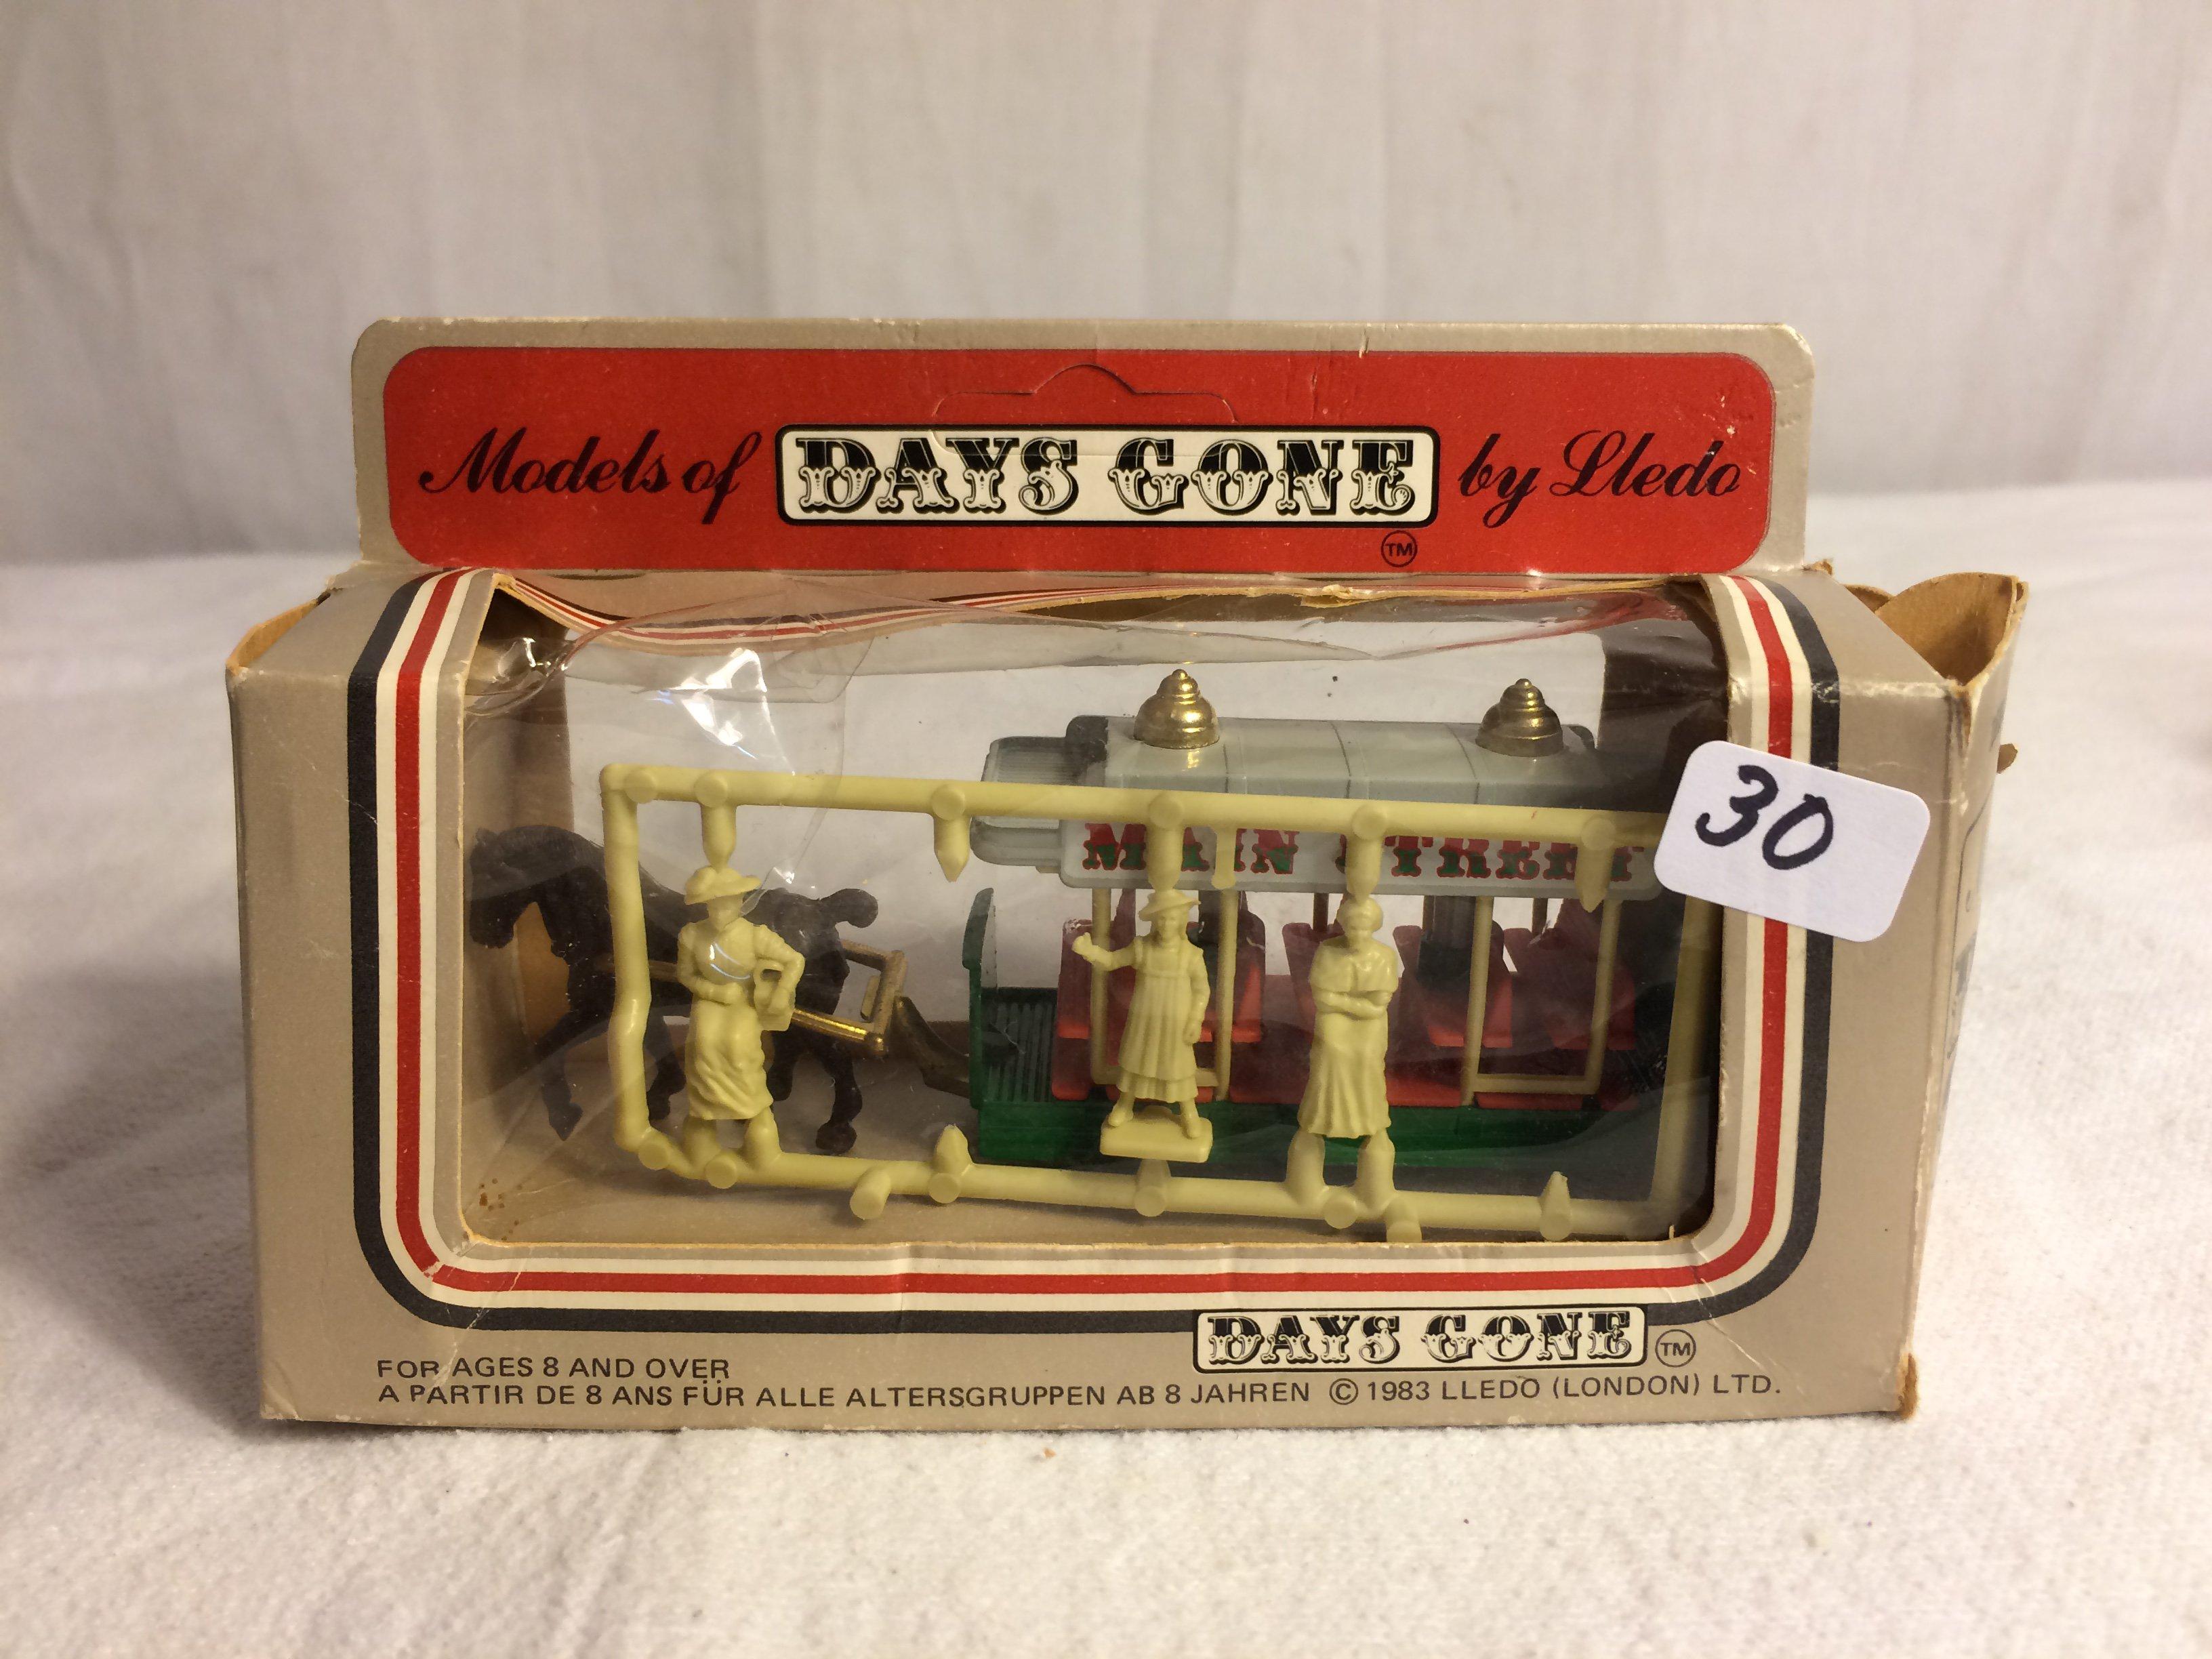 Collector NIP Vintage 1983 Lledo Models of Days Gone No.1  5.5" Width 2.3/4" Tall Box Size